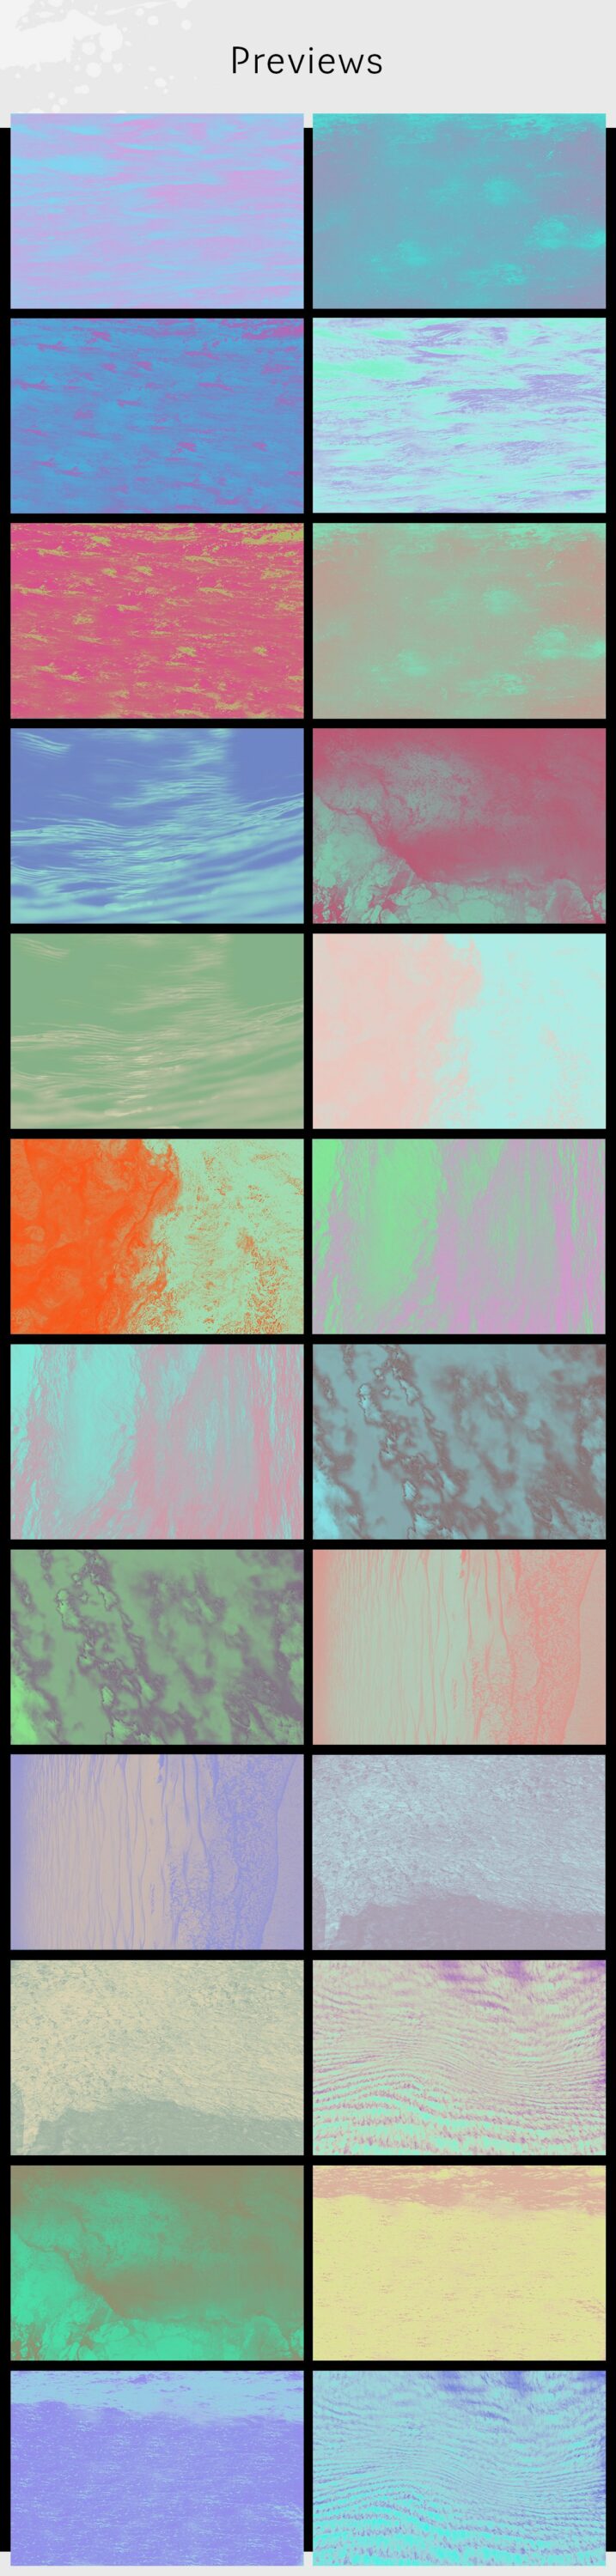 Diverse of colorful gradient textures.